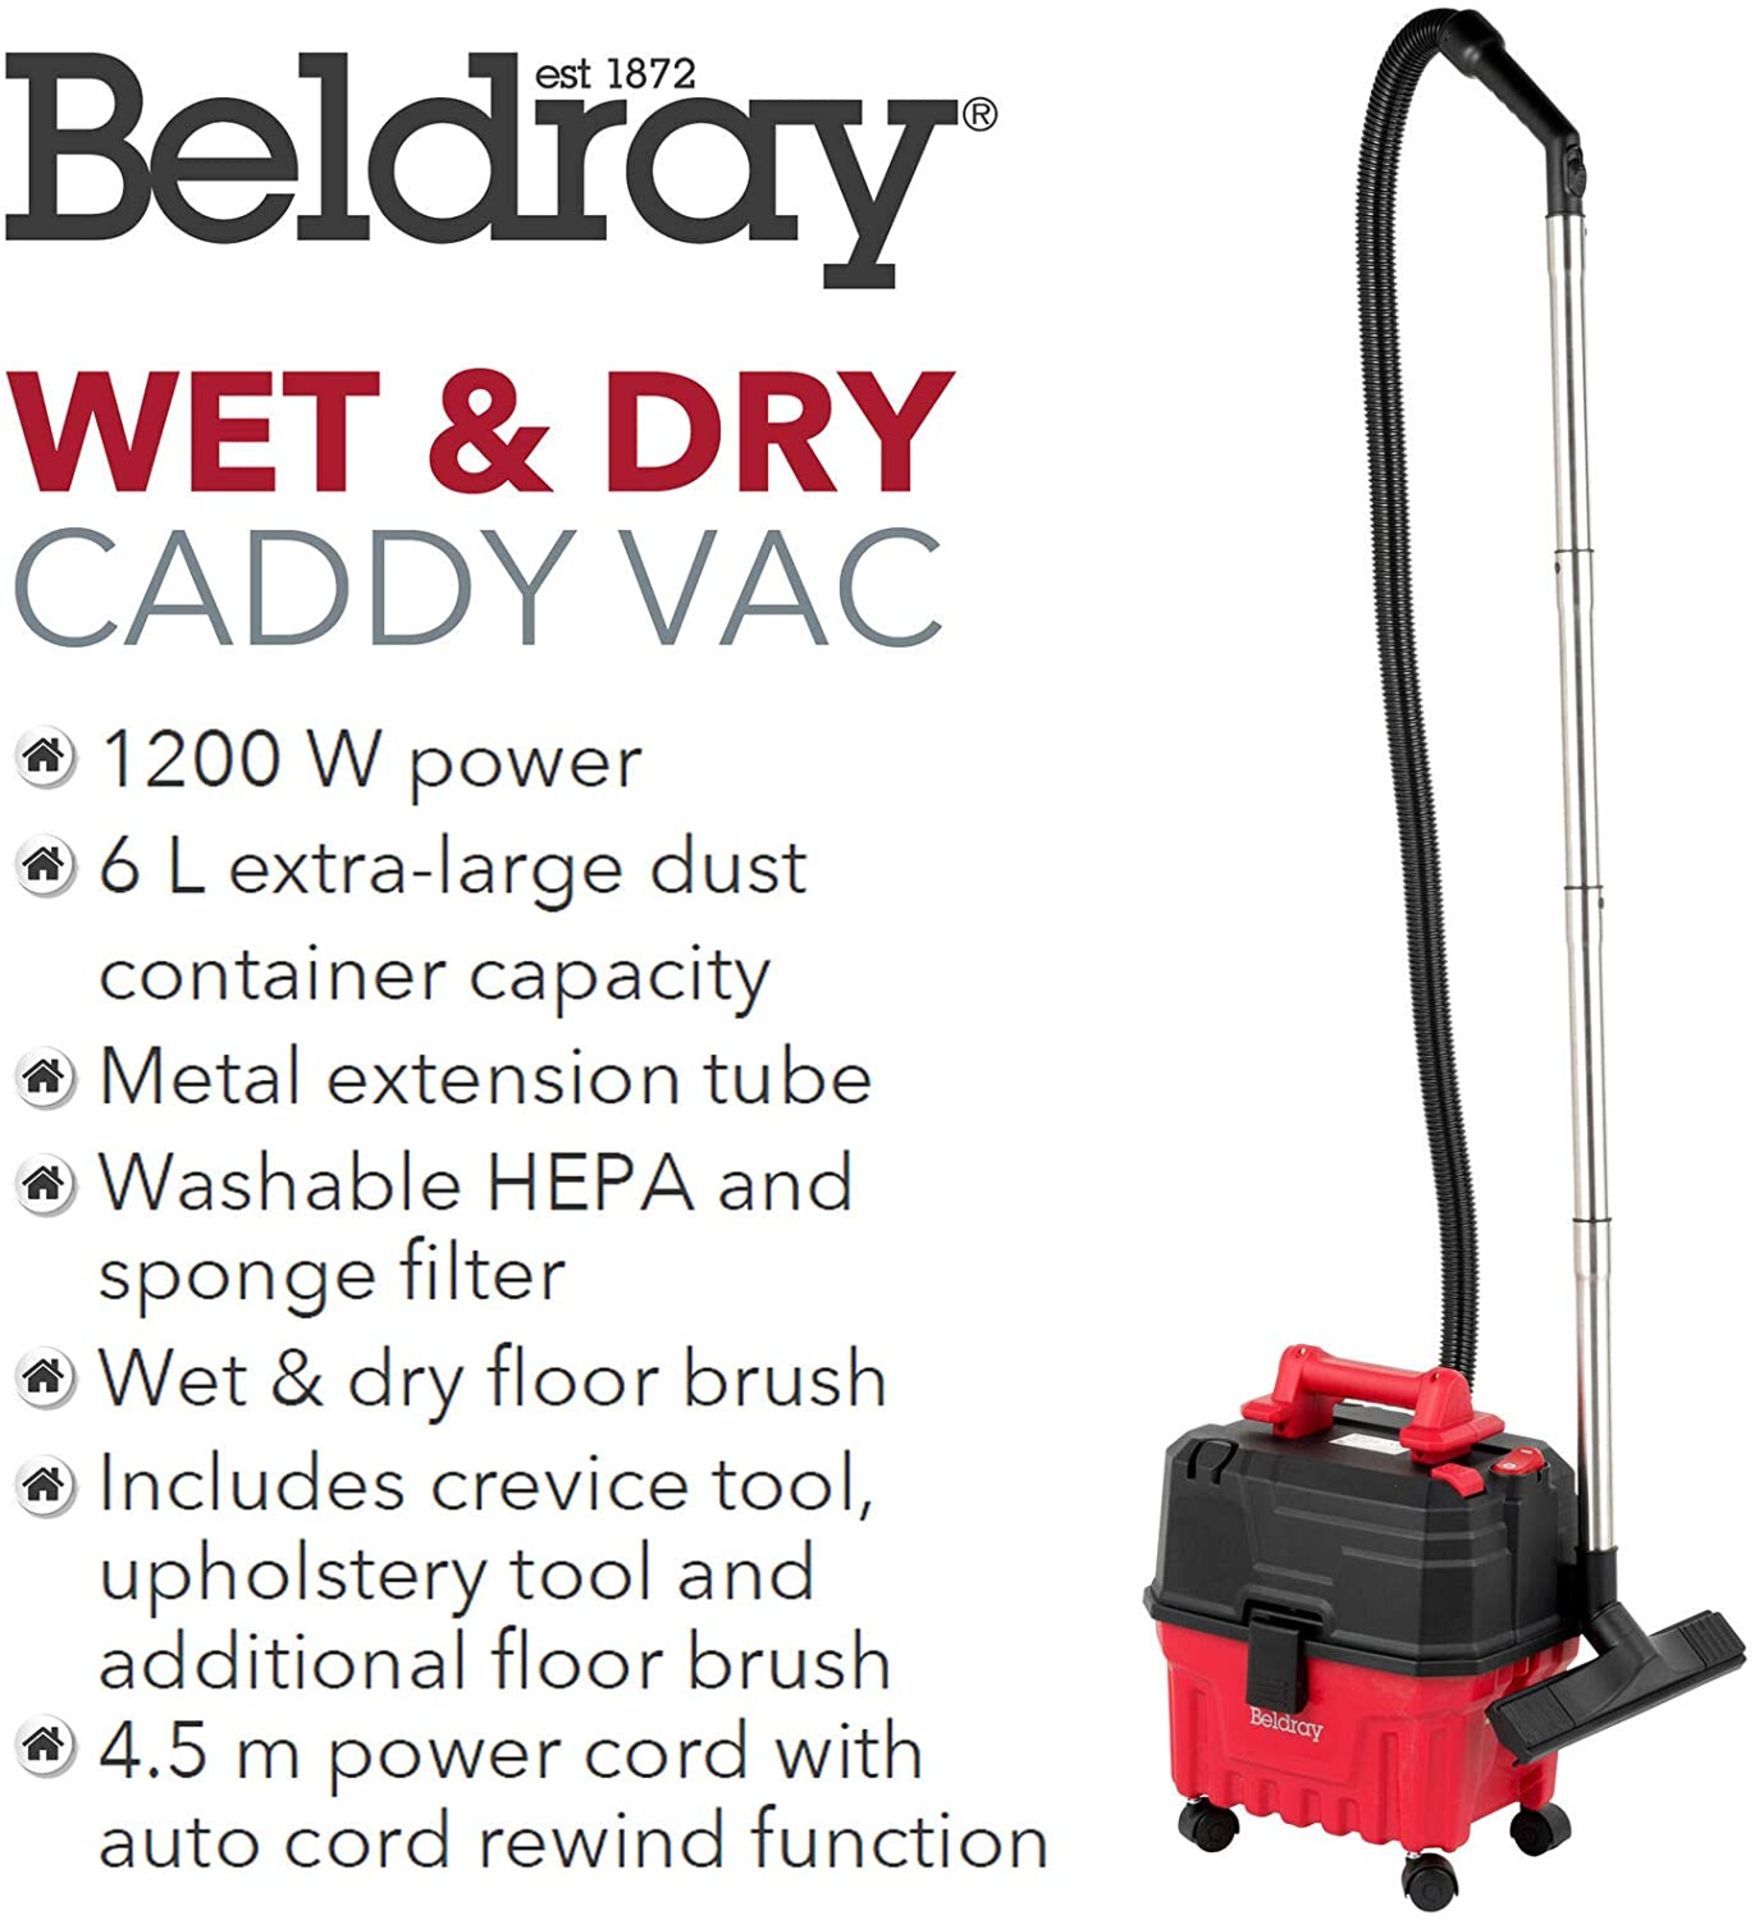 Brand New Beldray Wet & Dry 3-in-1 Caddy Vacuum Cleaner with Blow Function | Accessories